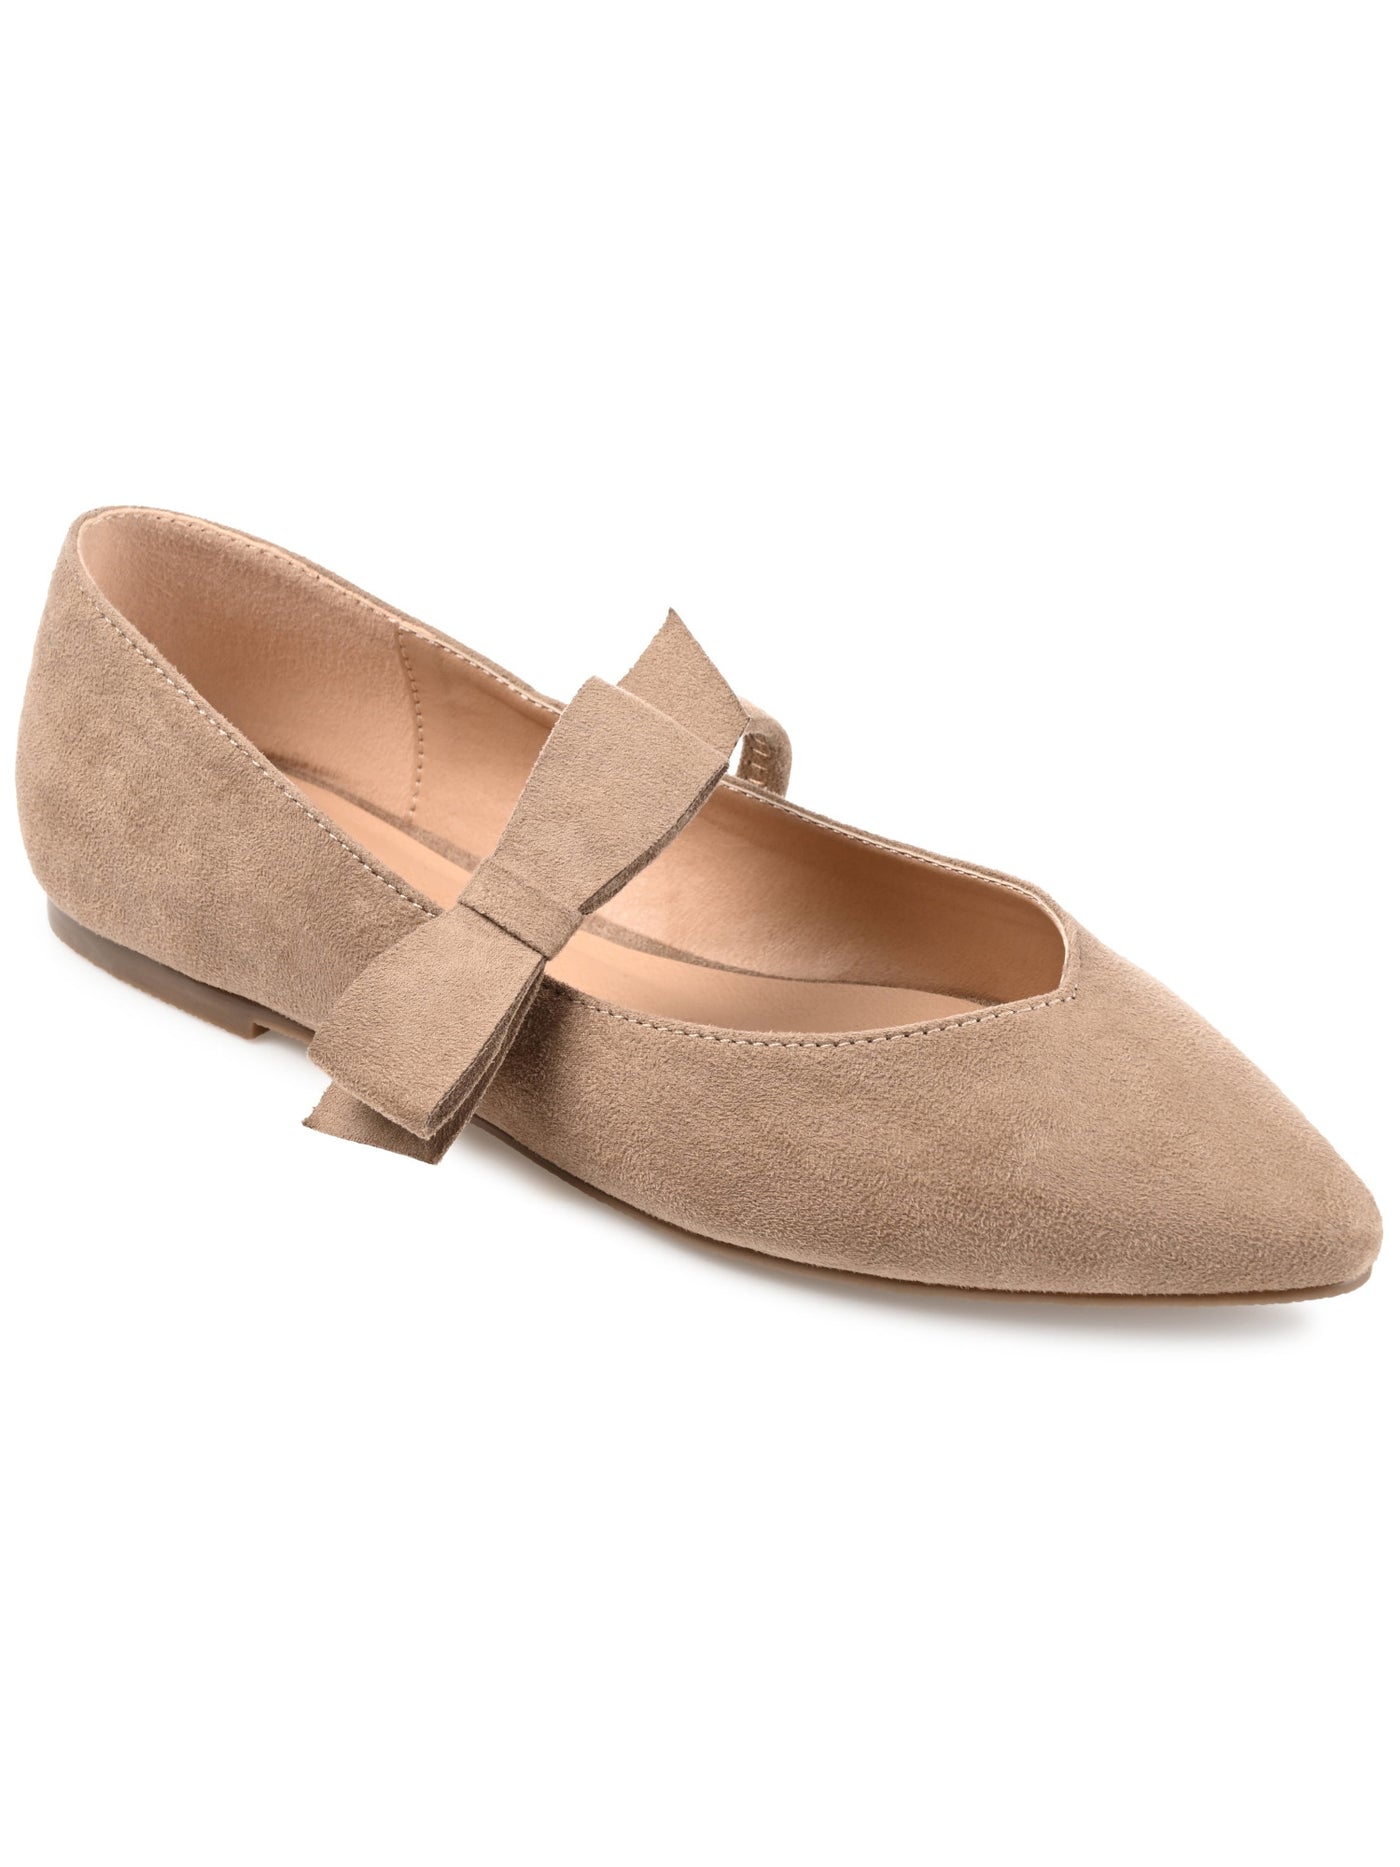 JOURNEE COLLECTION Womens Beige Bow Accent Padded Aizlynn Pointed Toe Slip On Flats Shoes 7.5